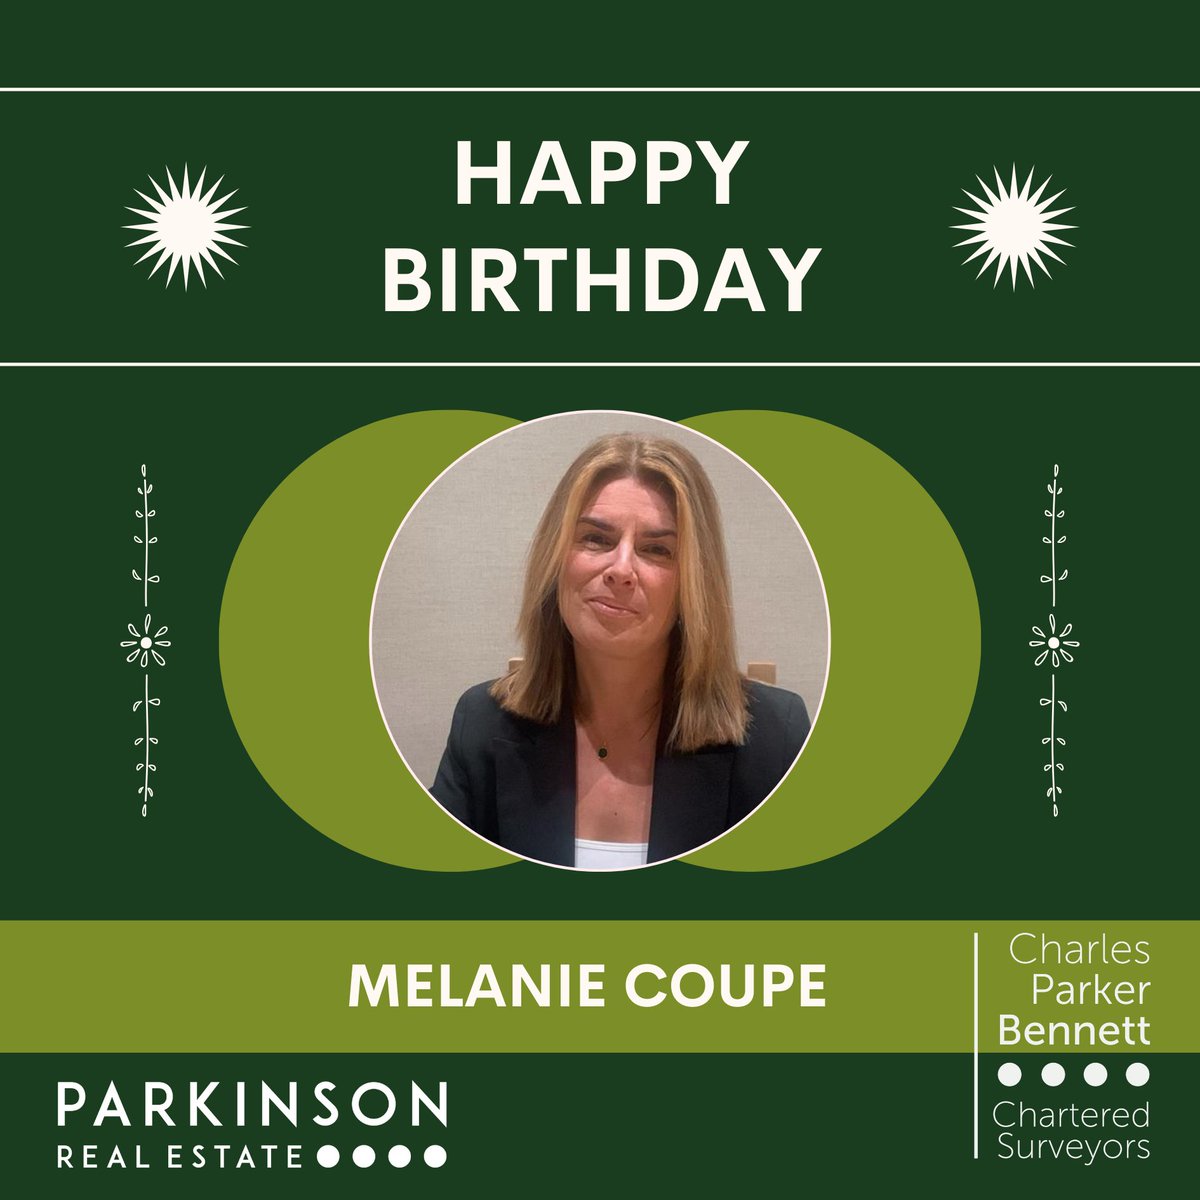 🎂HAPPY BIRTHDAY MEL🎂

The @CPBPreston and @ParkinsonRE teams would like to wish Mel Coupe a very happy birthday today!

As with all employees, we have left her a little something to enjoy on her special day! 🍷🎂

#HappyBirthday #Celebration #CharlesParkerBennett